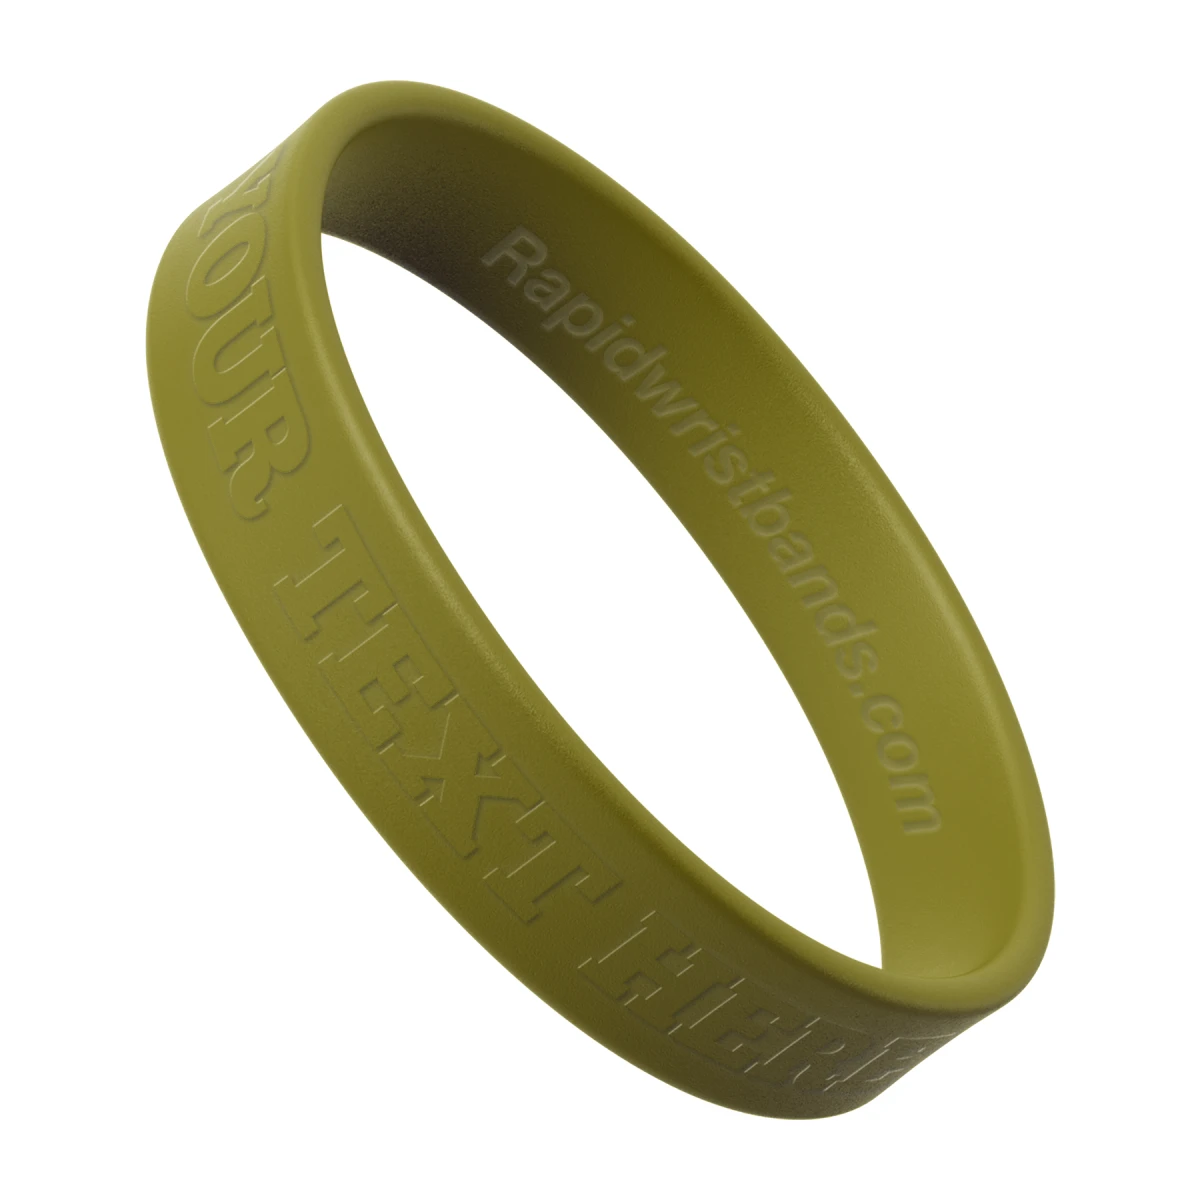 Olive Green Wristband With Your Text Here Embossed